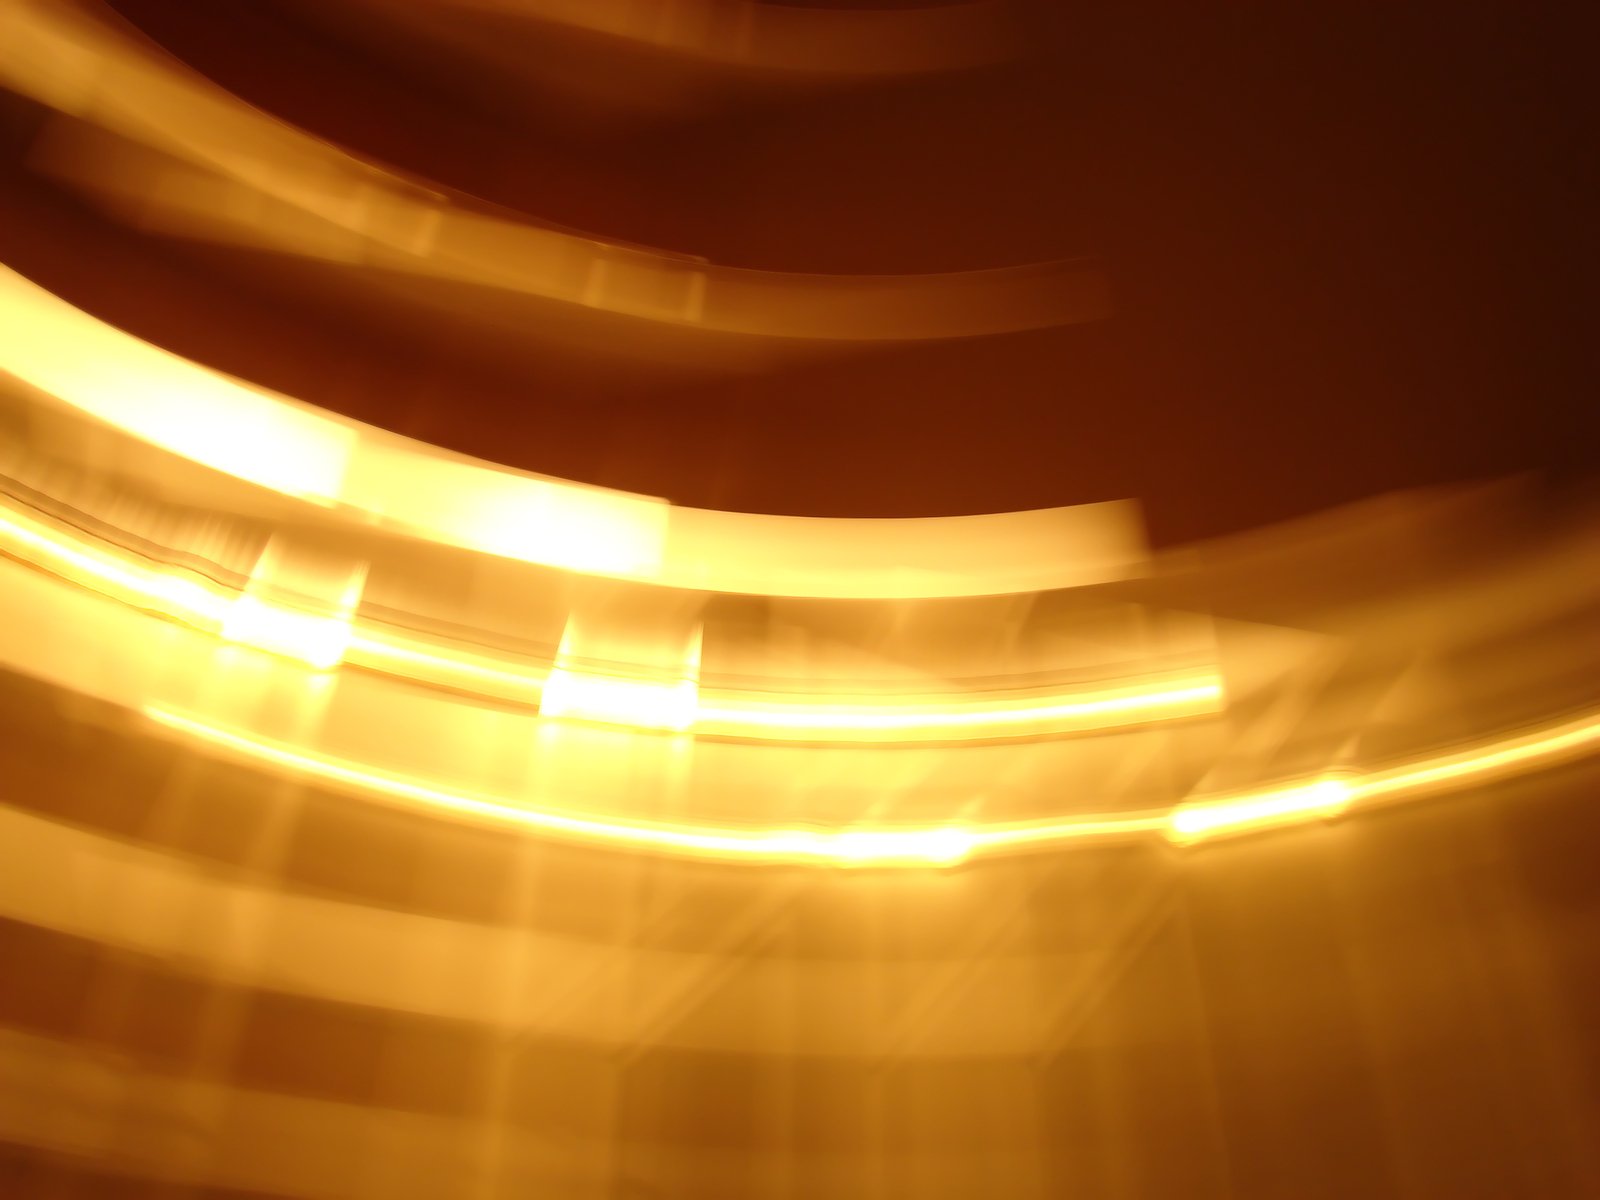 an abstract po of the light coming from below